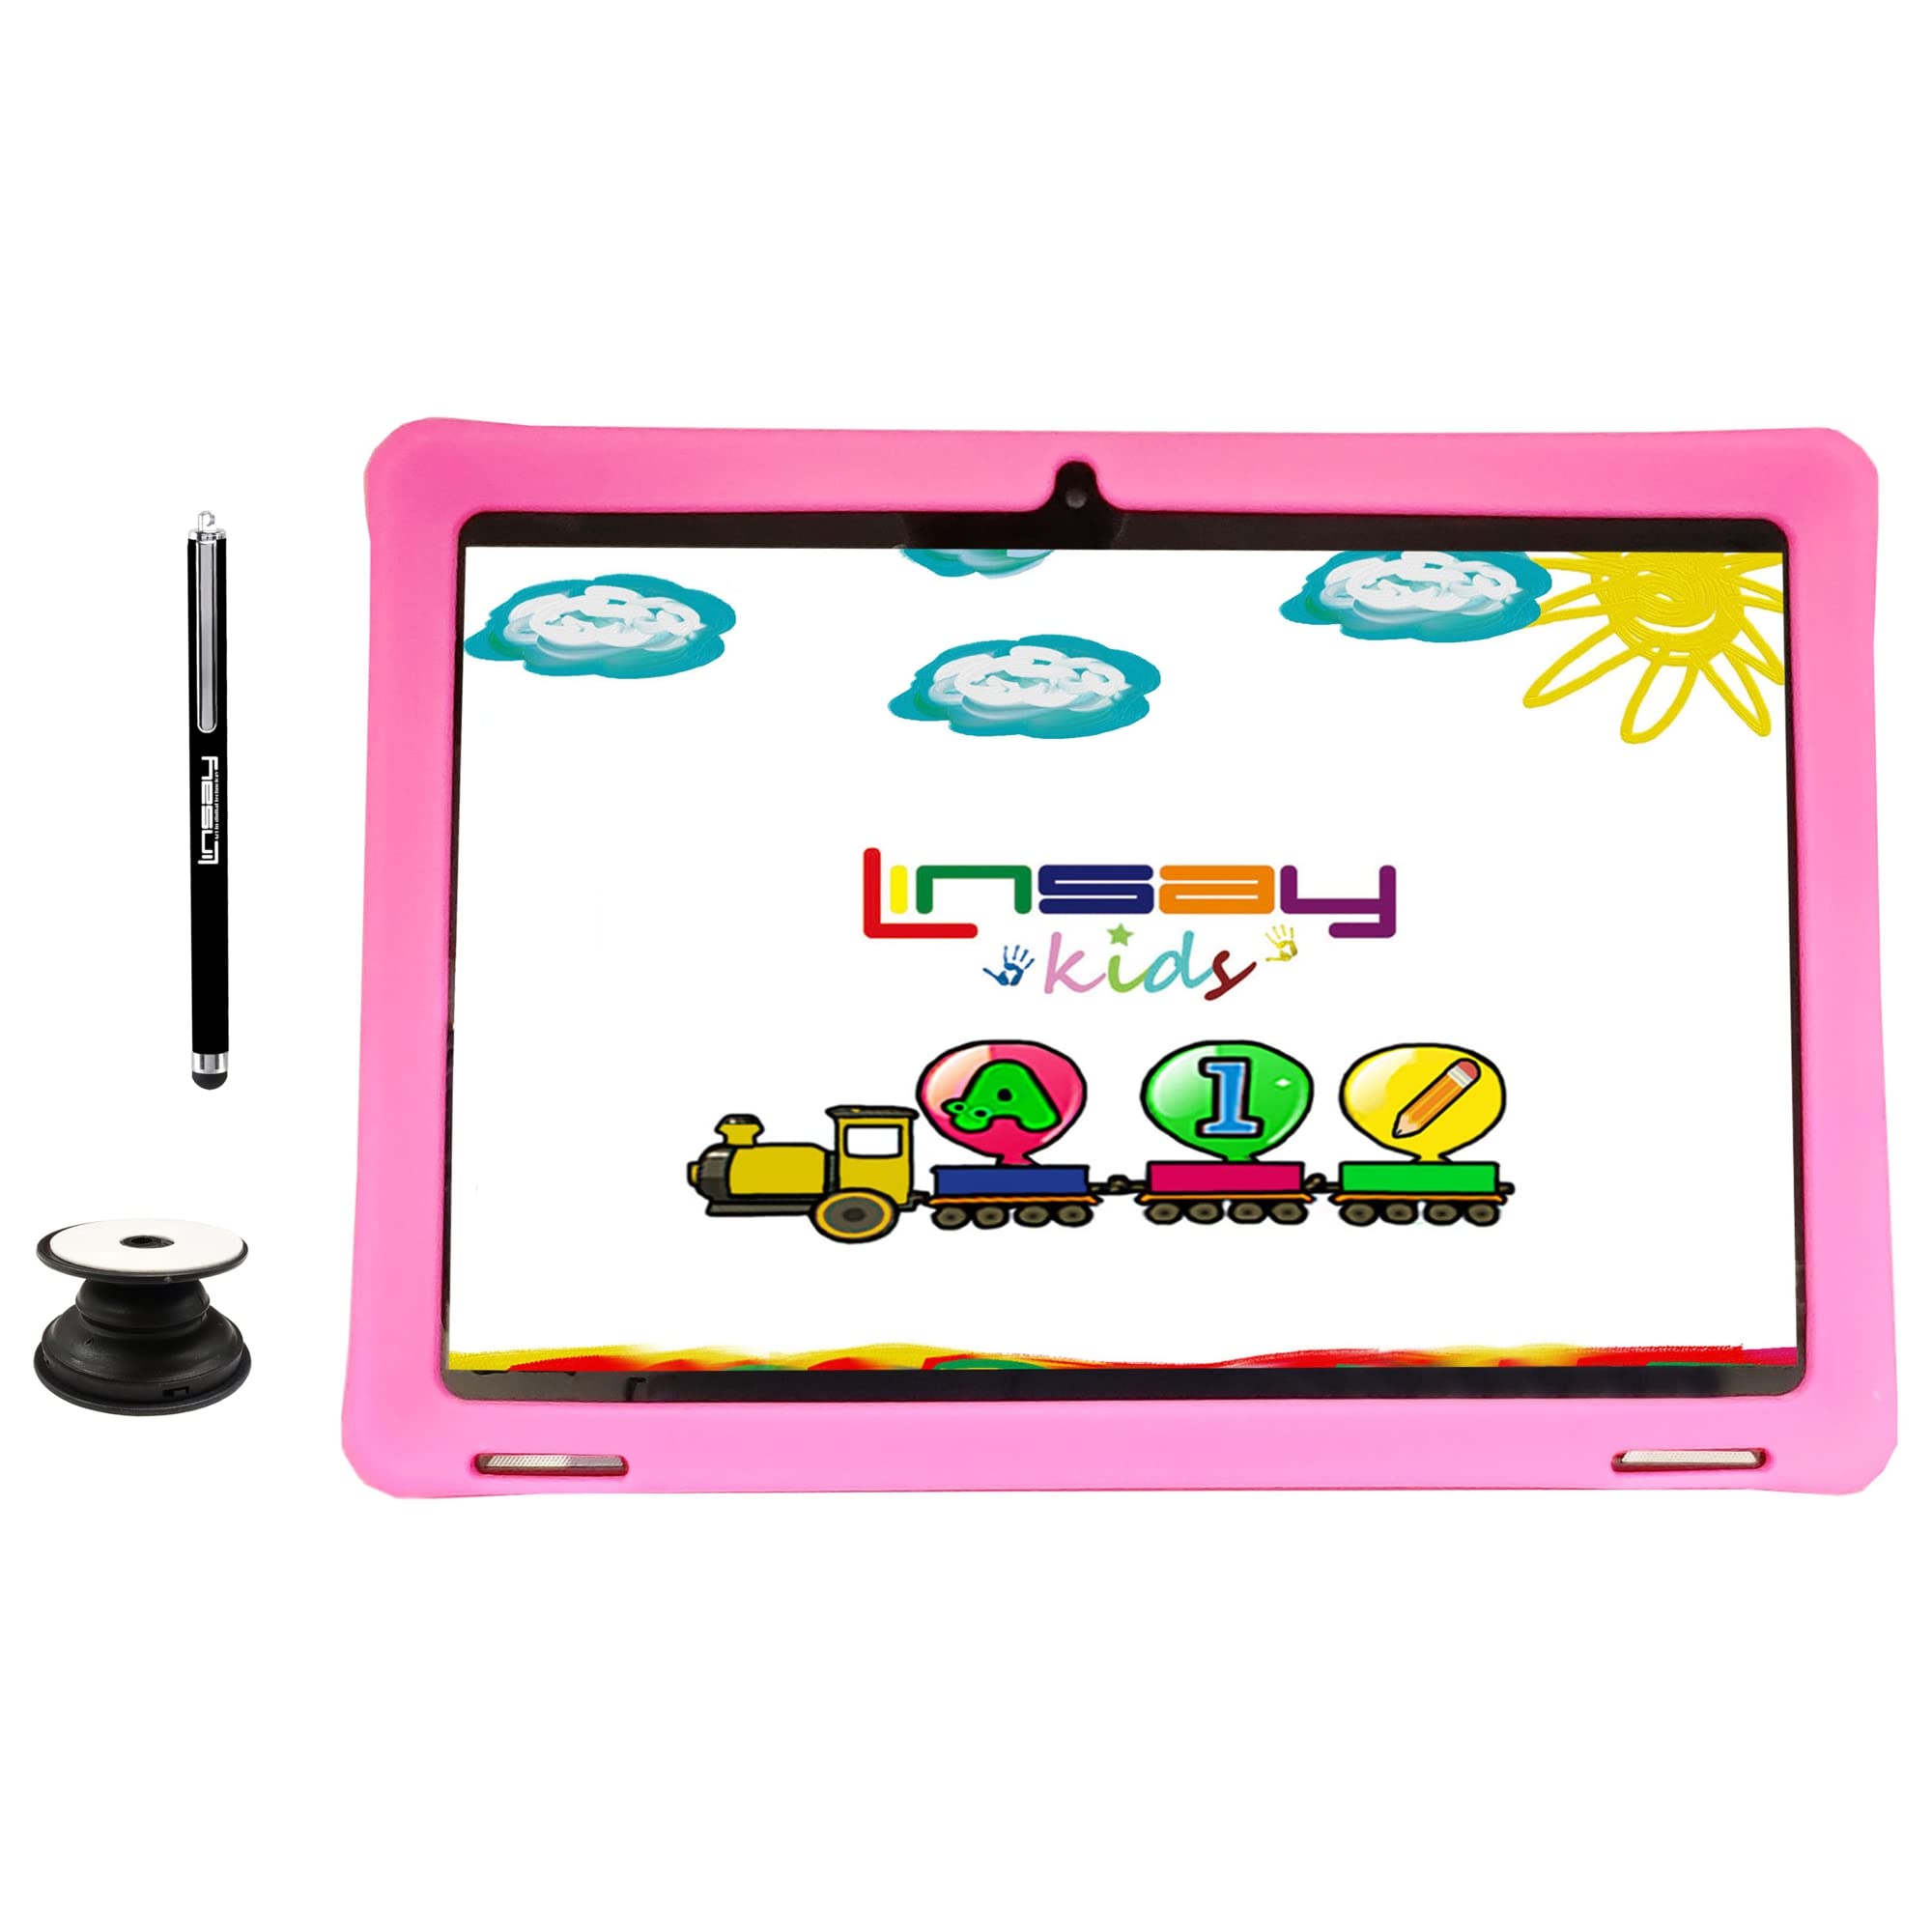 LINSAY 10.1" 1280x800 IPS 2GB RAM 64GB Android 13 Tablet with Kids Pink Defender Case, Backpack, Pop Holder and Pen Stylus